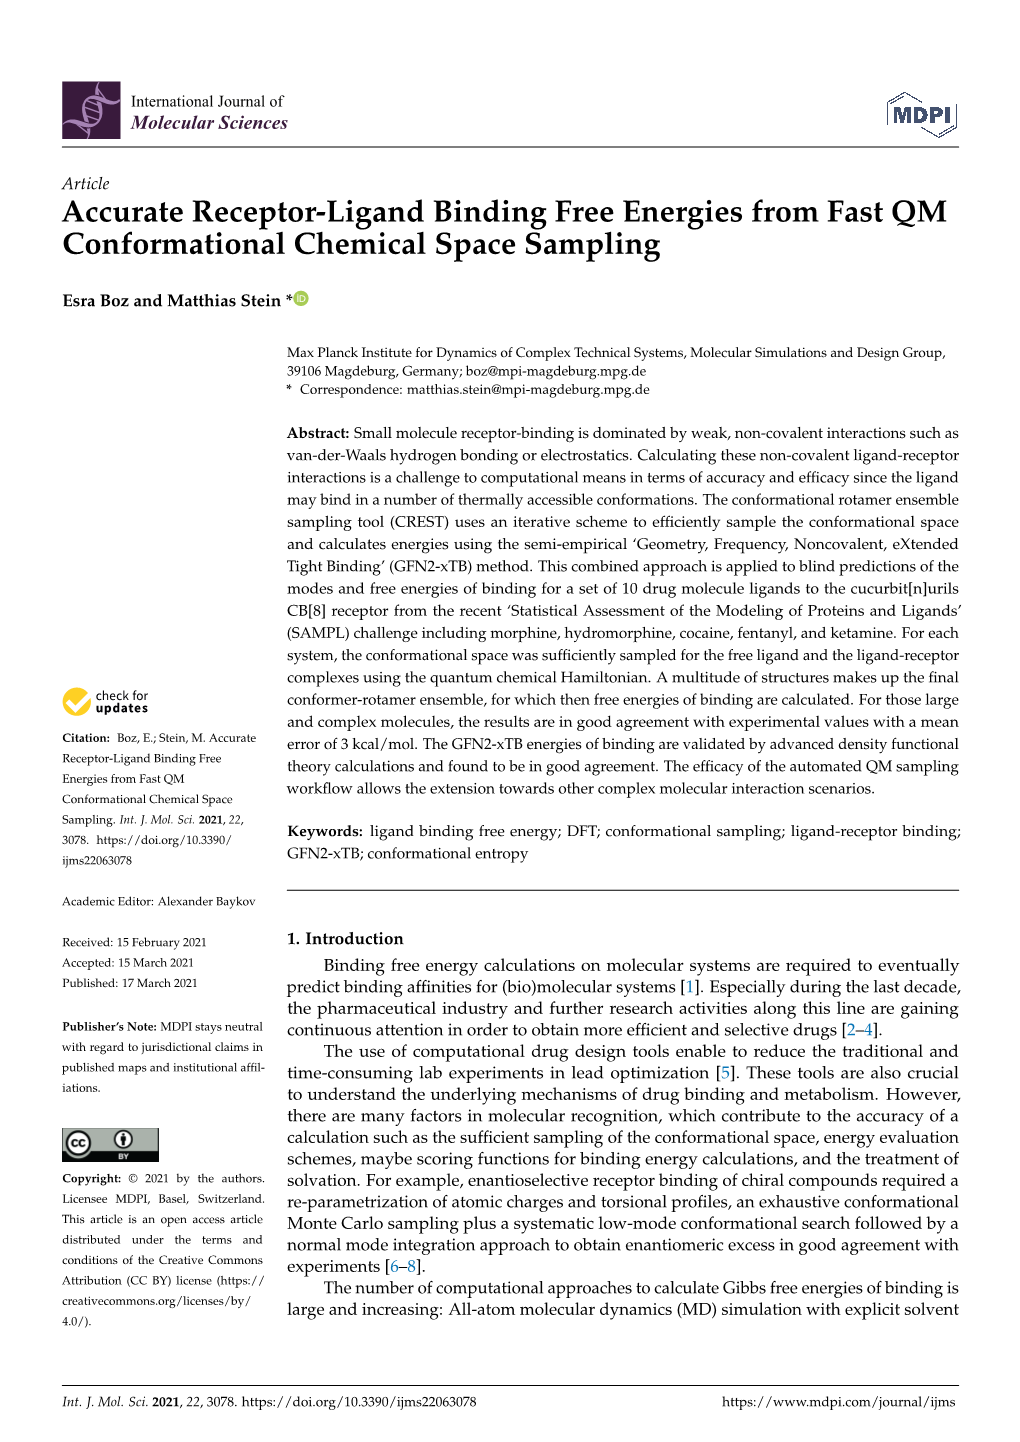 Accurate Receptor-Ligand Binding Free Energies from Fast QM Conformational Chemical Space Sampling